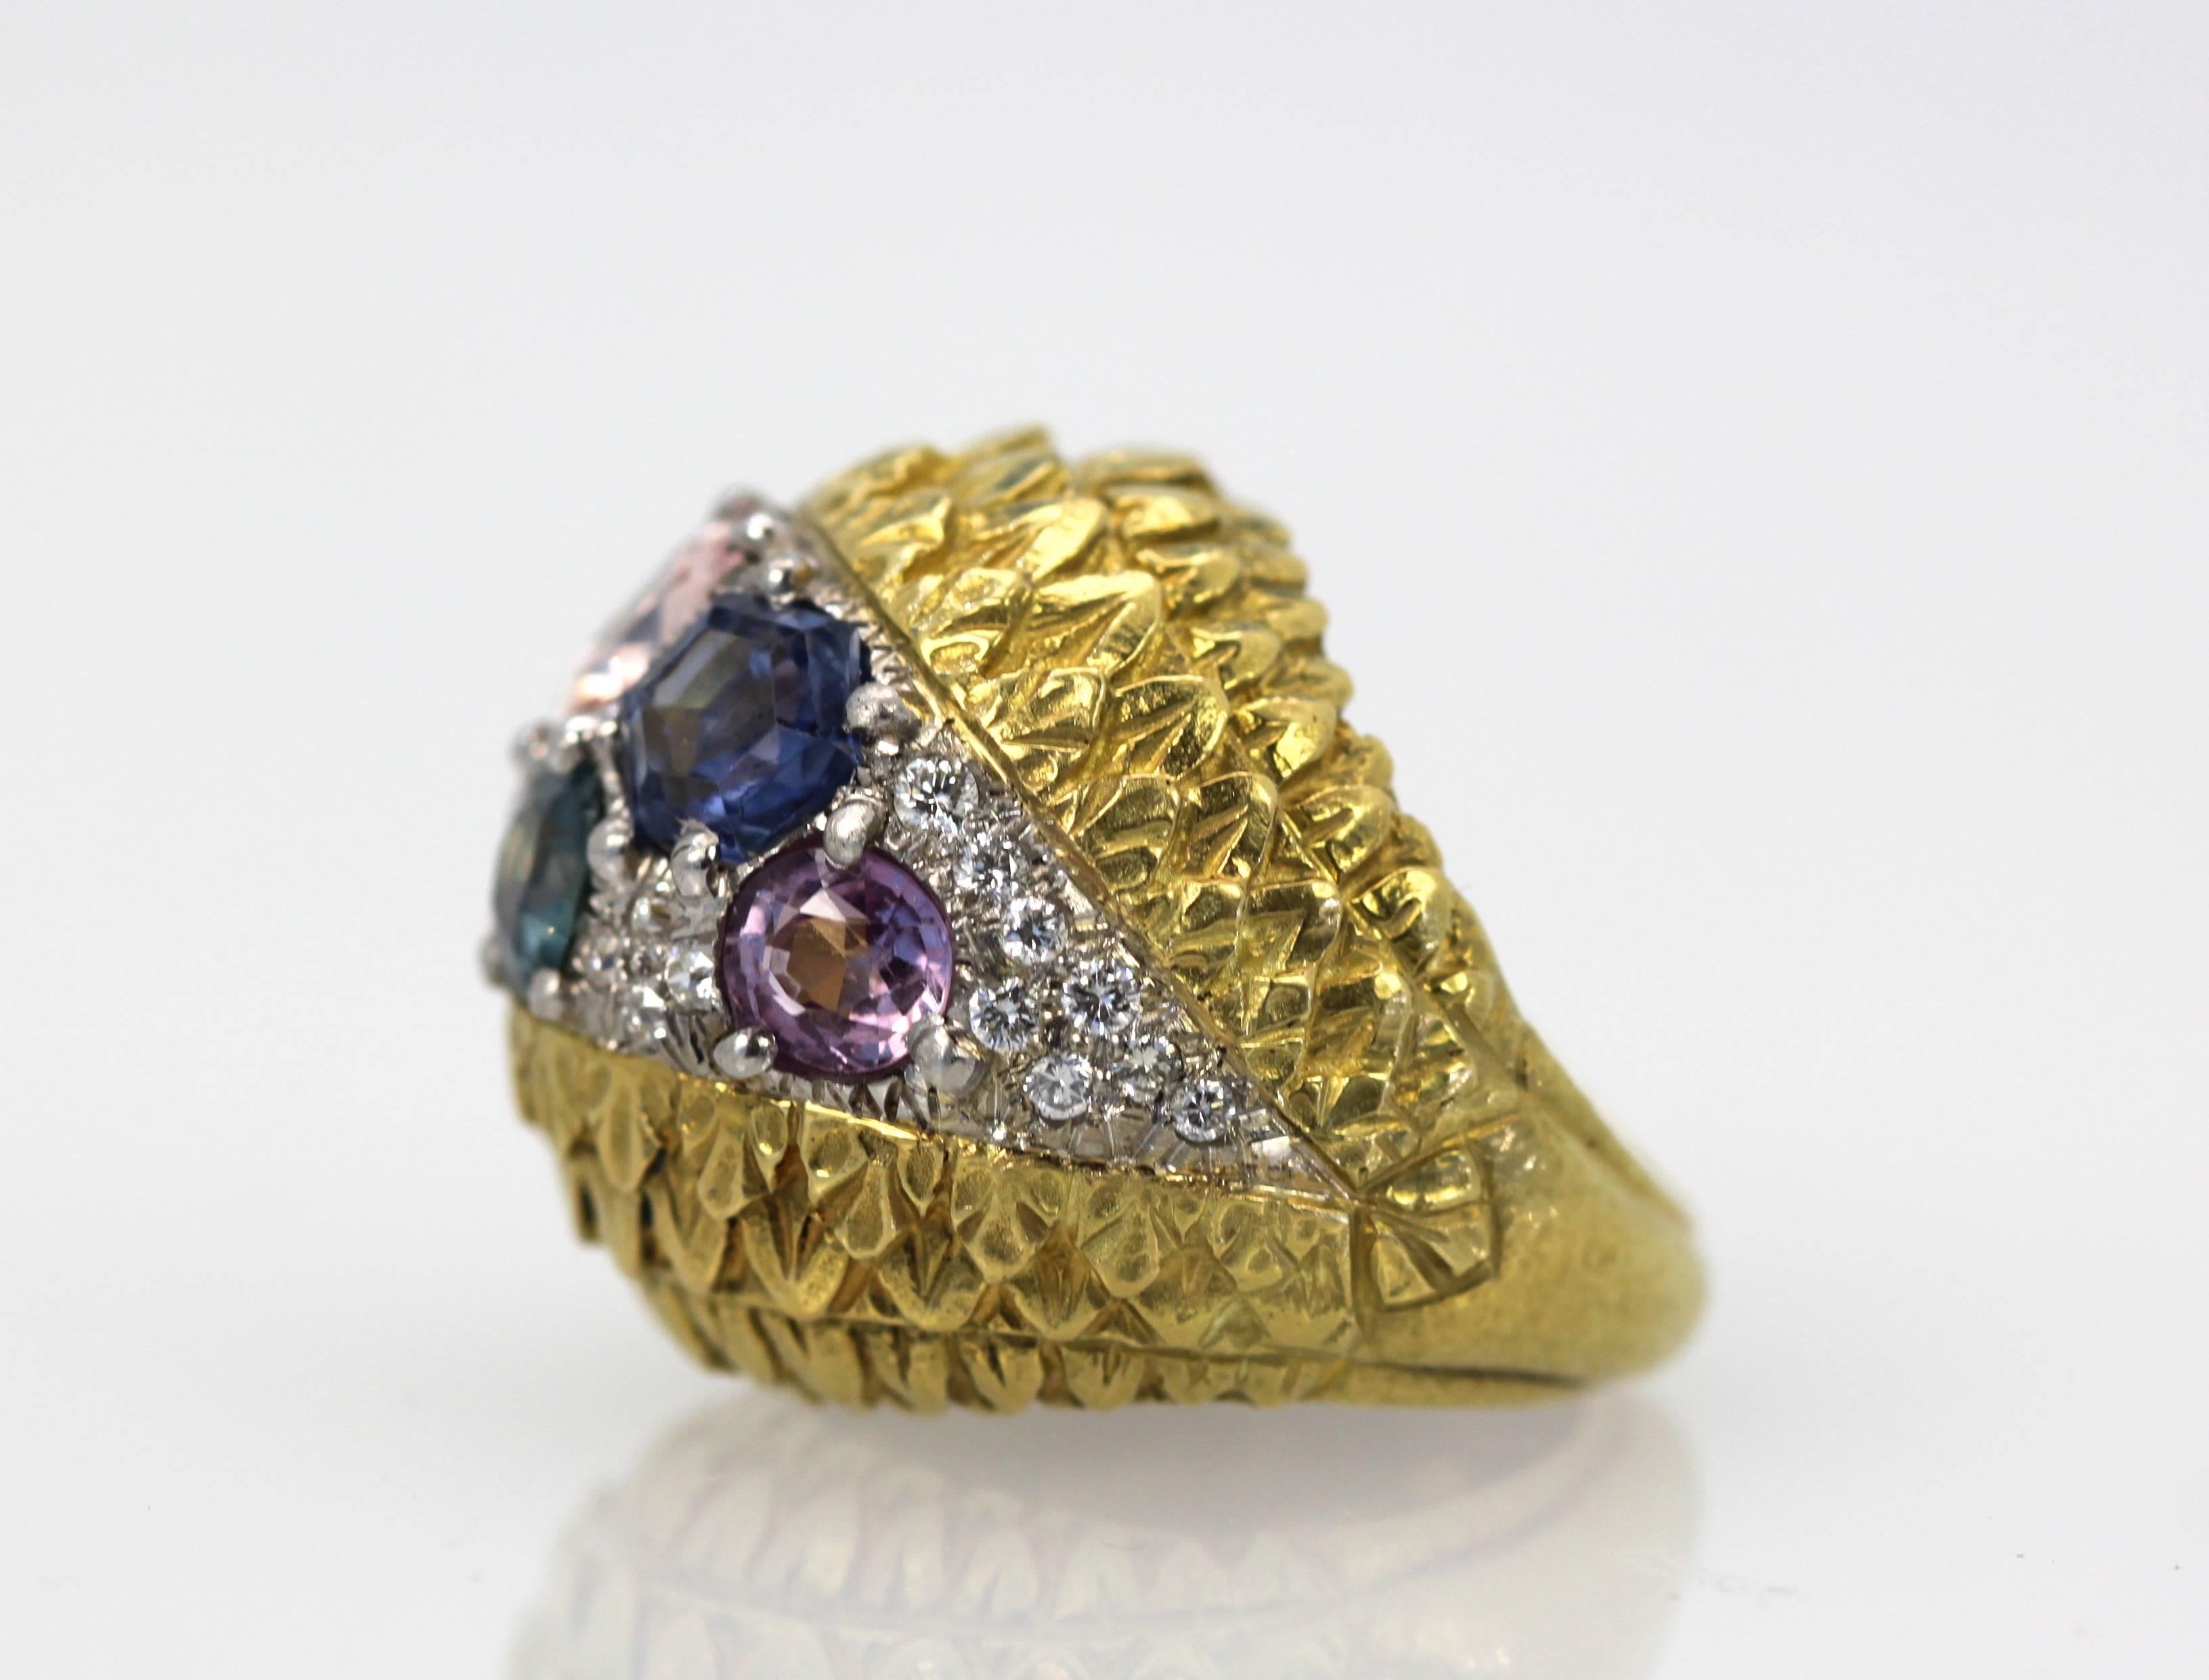 Love David Webb, I just can't get enough of his jewelry. It is always remarkable with the finest workmanship and the very best grade of Gemstones and Diamonds always the very best. This ring comes from an auction house in London, England. The body